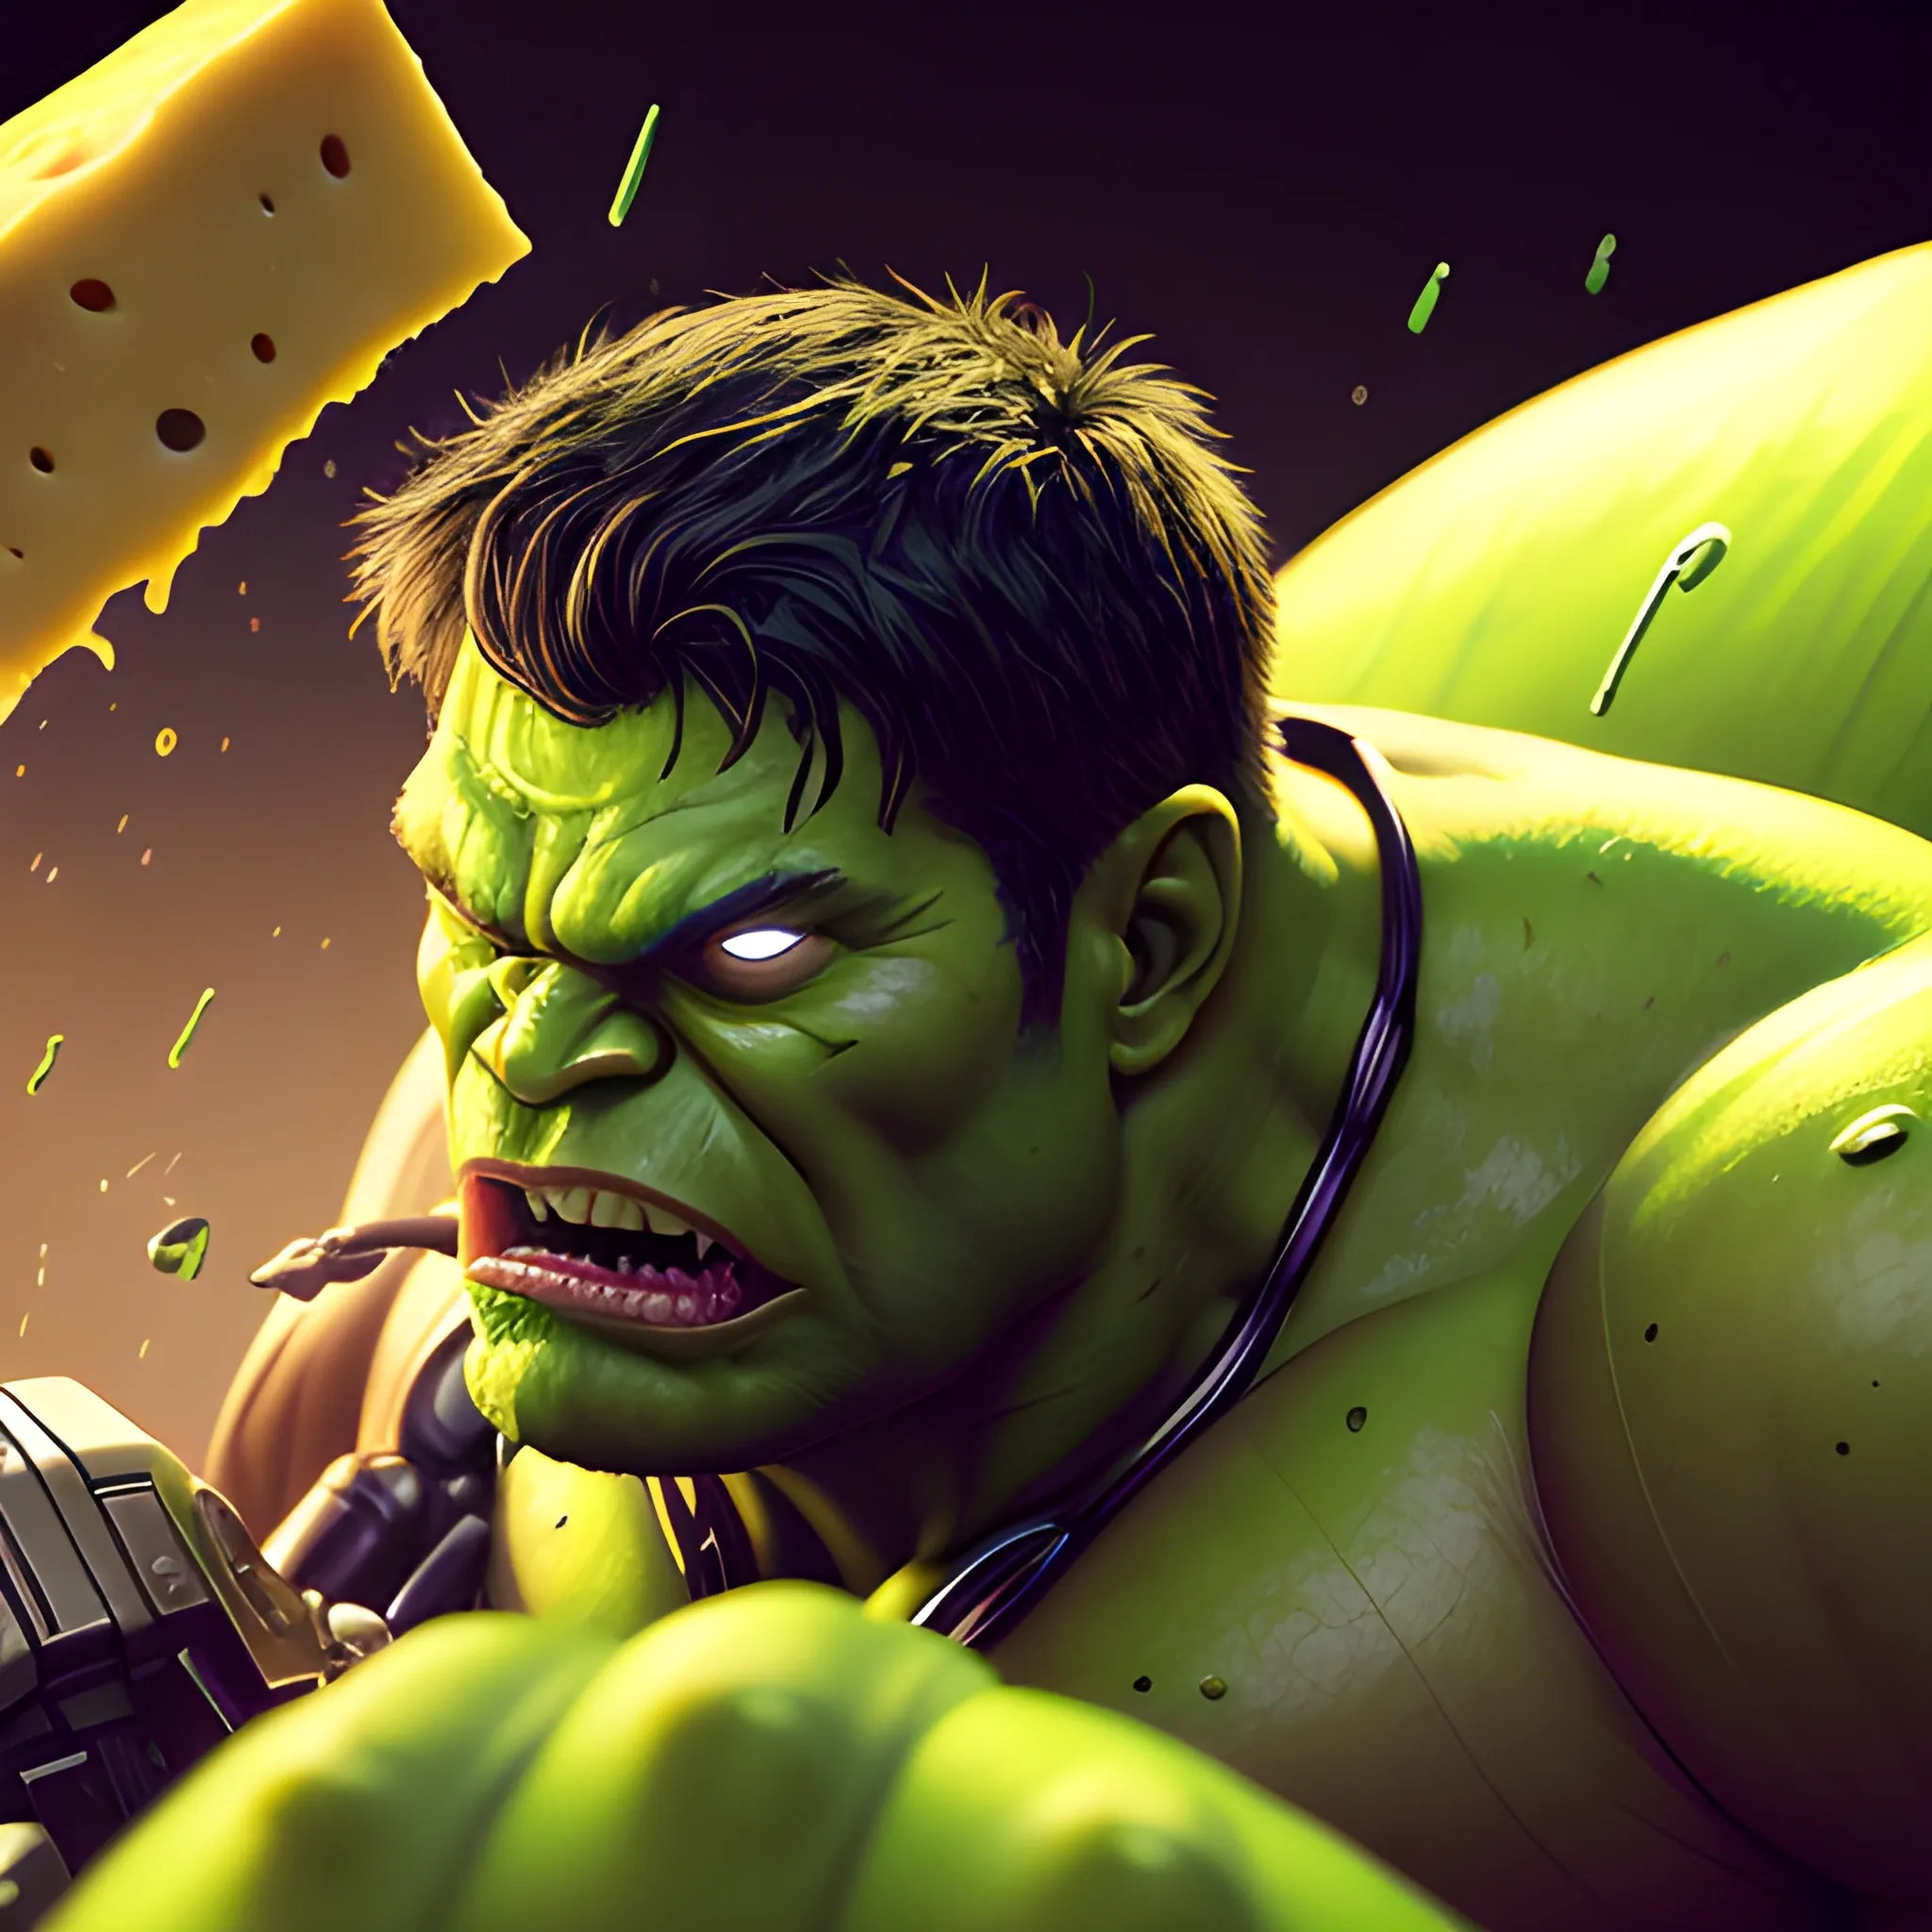 hyper-realistic, 4k image, green Hulk with cybernetic enhancement, biting single slice of pizza, with cheese visibly dripping from the slice, soft studio lighting and edge highlights, luxurious cyberpunk background.